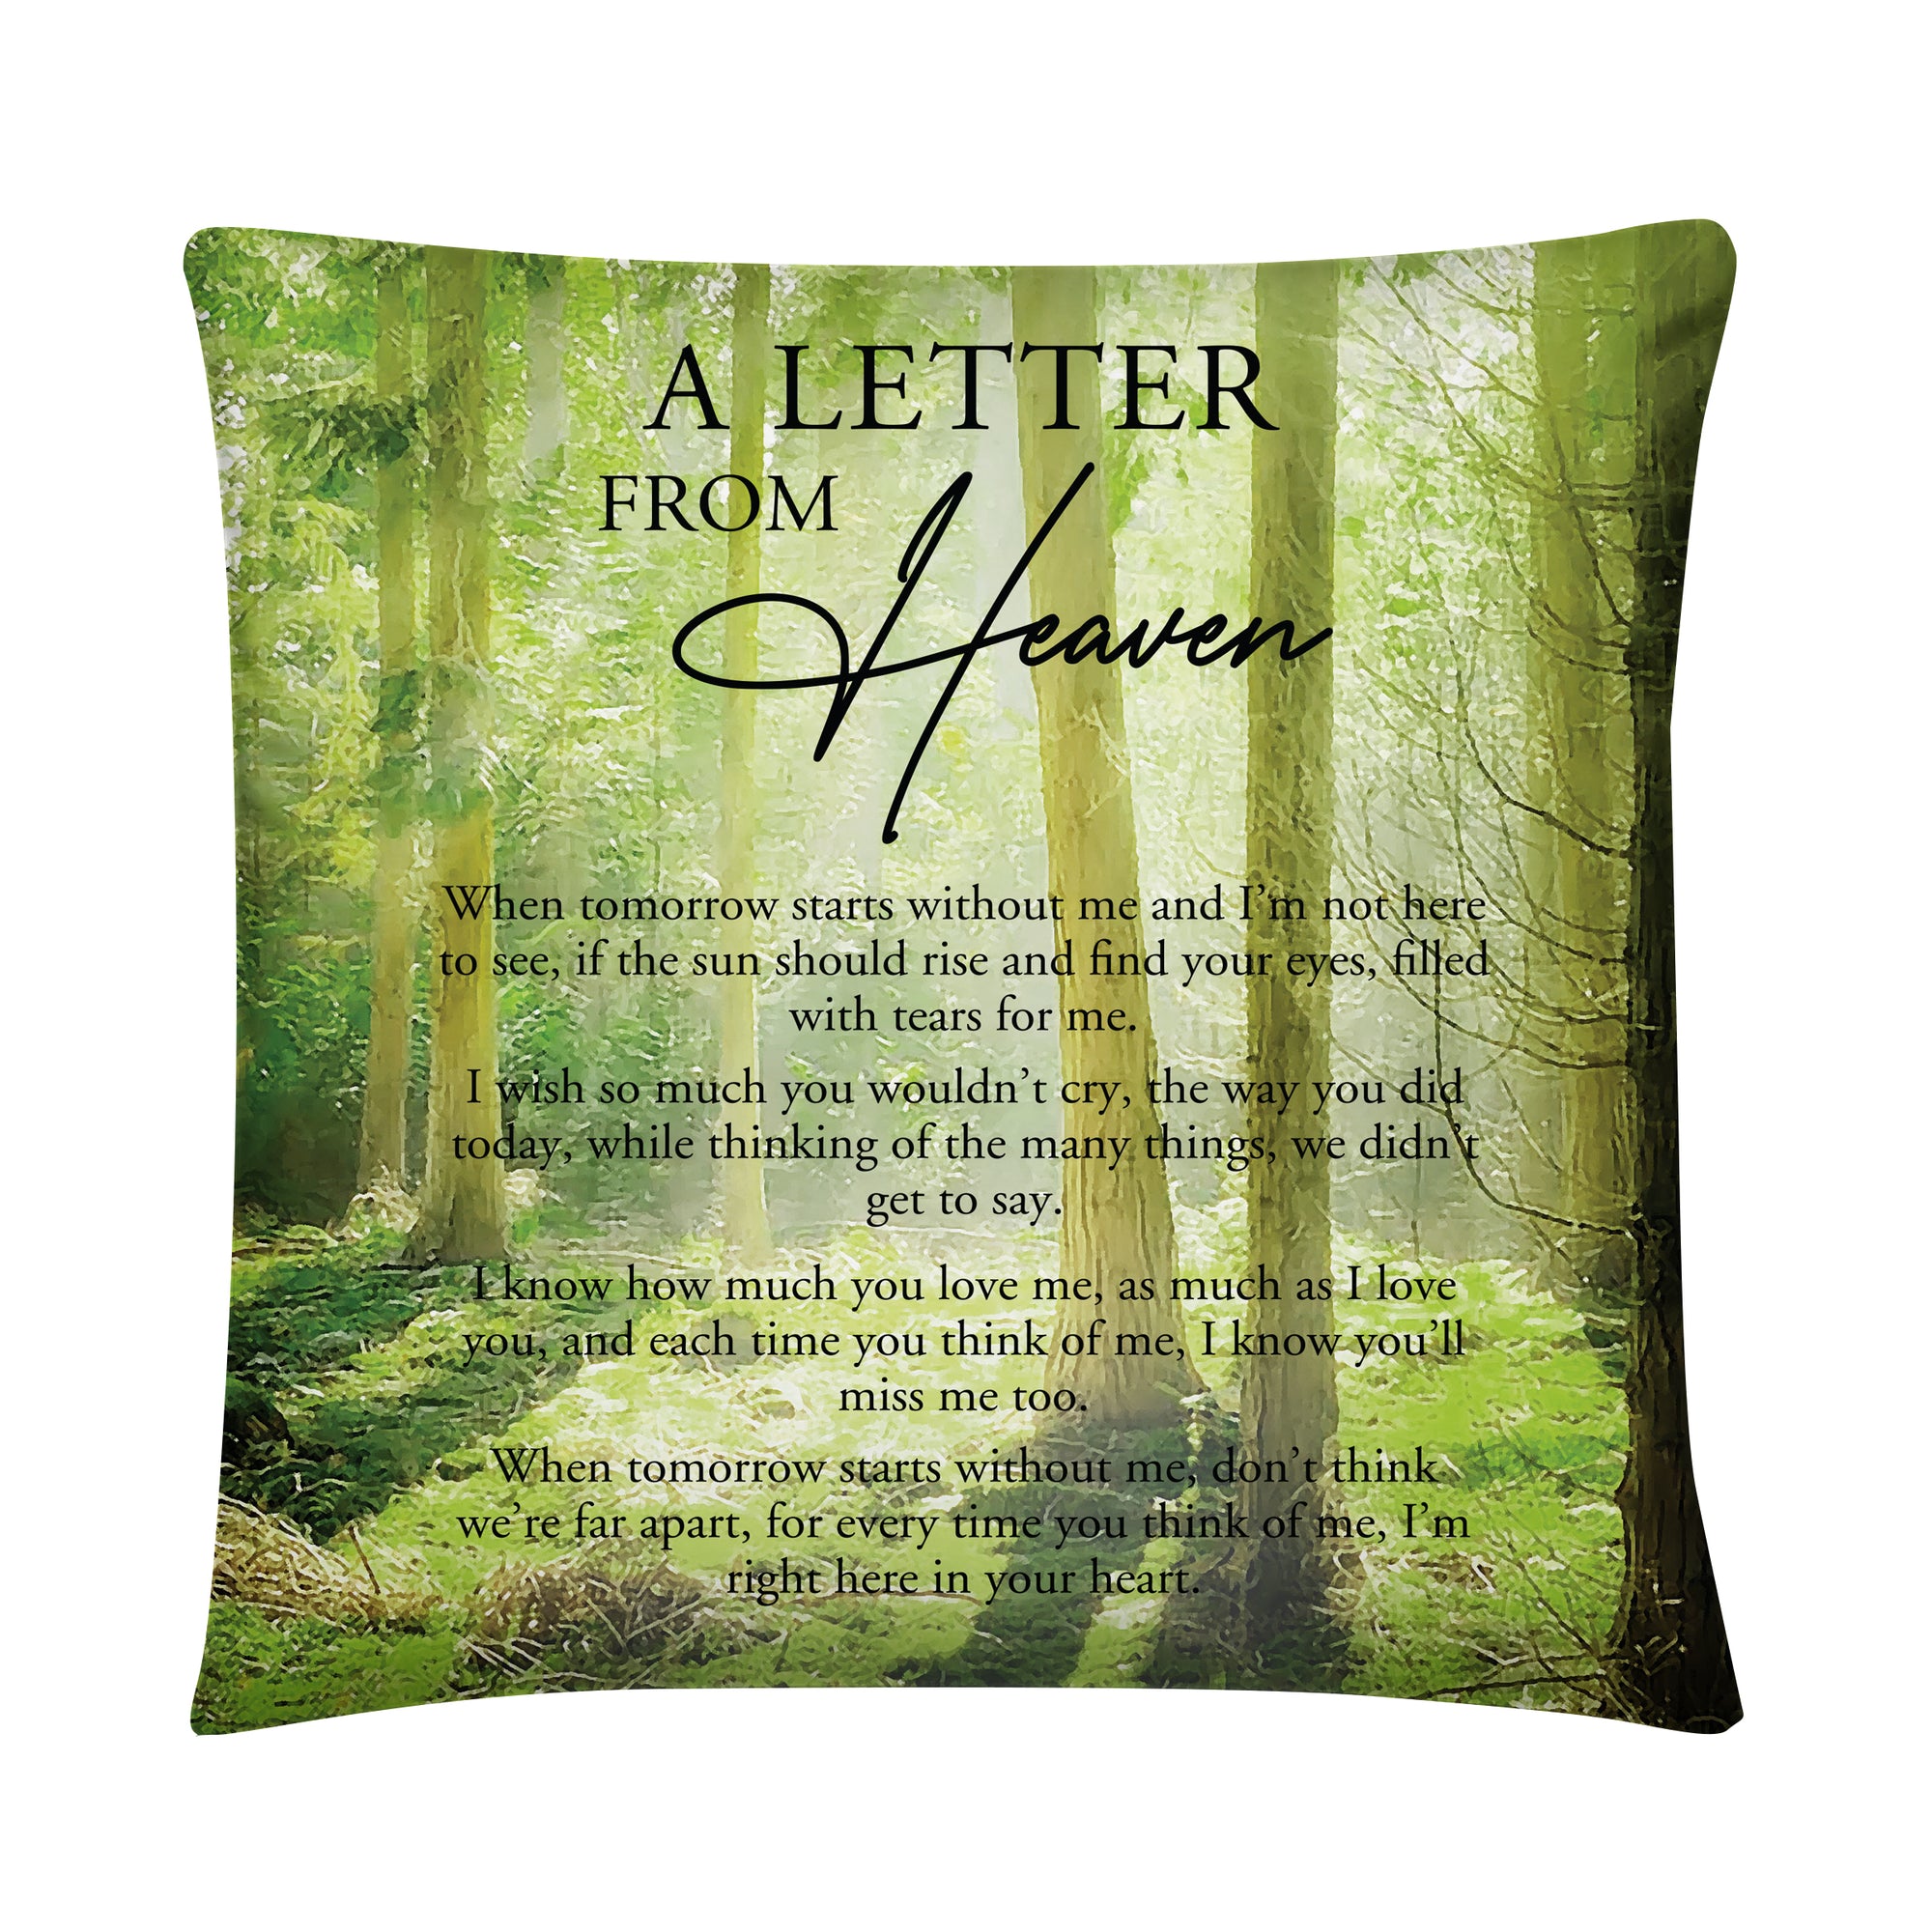 A memorial throw pillow with a serene design in soft colors, a comforting choice for home décor or as a memorial bereavement gift.